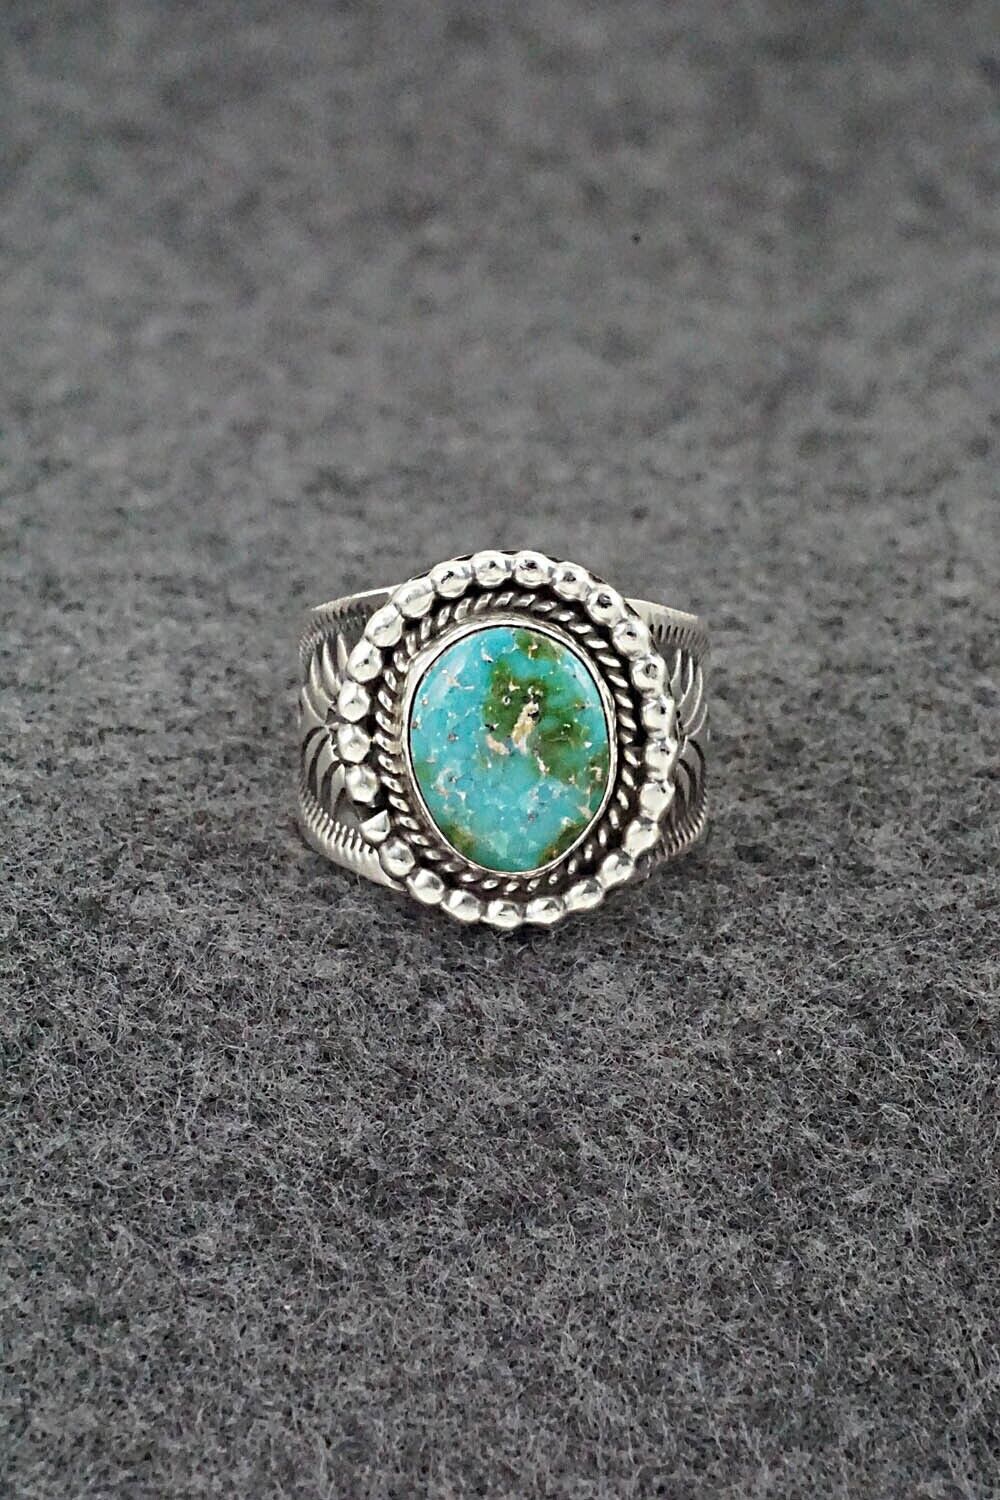 Turquoise & Sterling Silver Ring - Samuel Yellowhair - Size 7.25